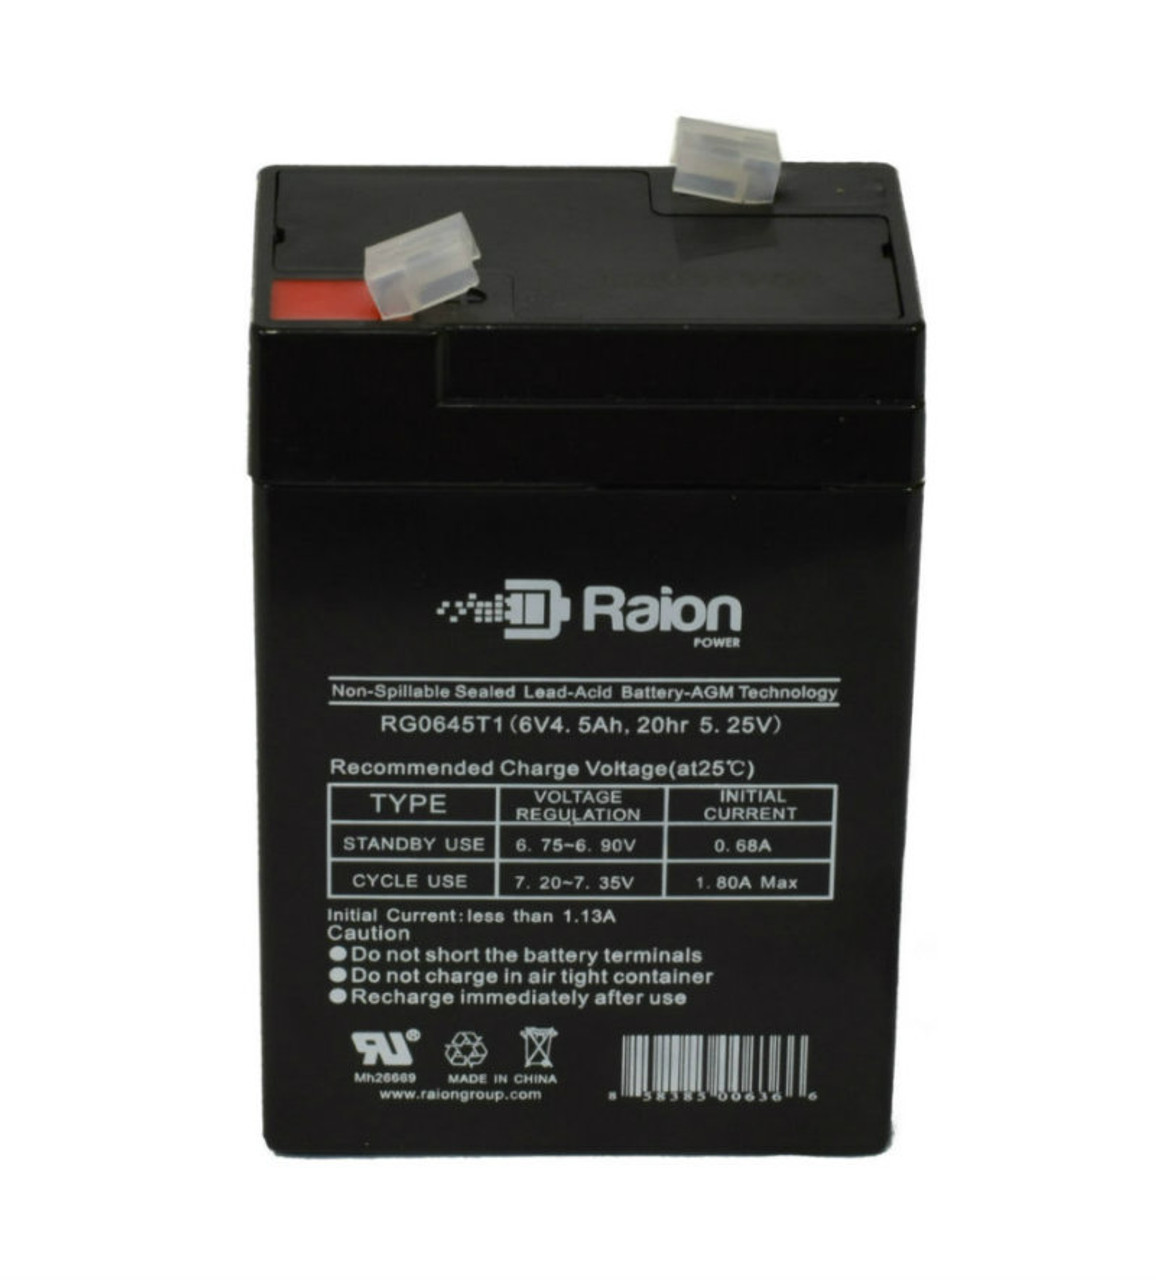 Raion Power RG0645T1 Replacement Battery Cartridge for Phantom Cables BT-6V-5A